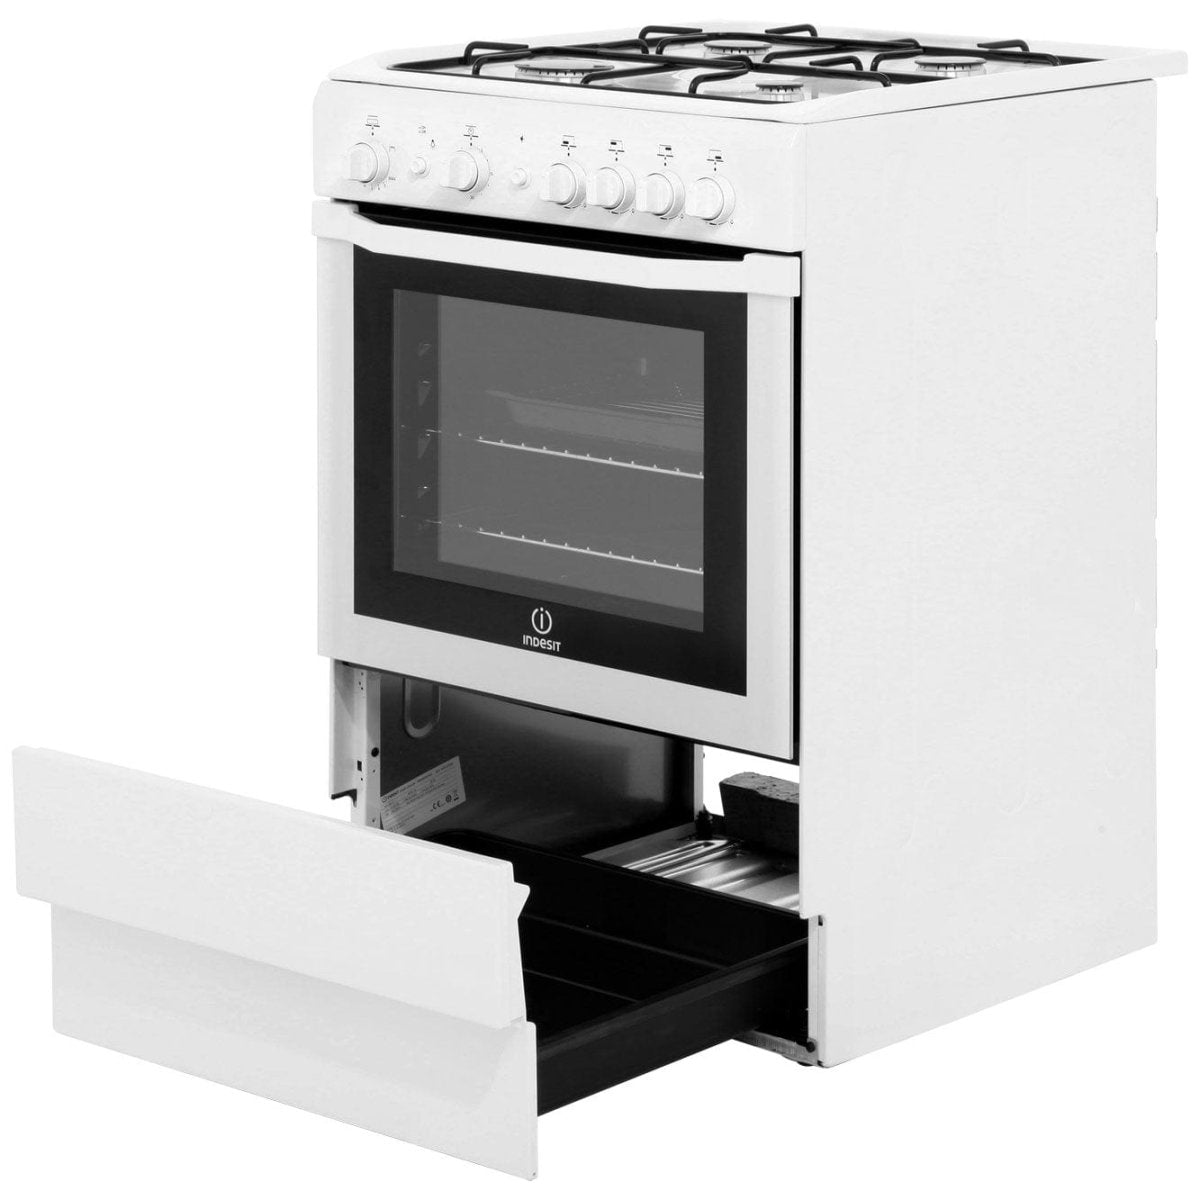 INDESIT I6GG1W 60cm Gas Cooker with Single Oven - White - Atlantic Electrics